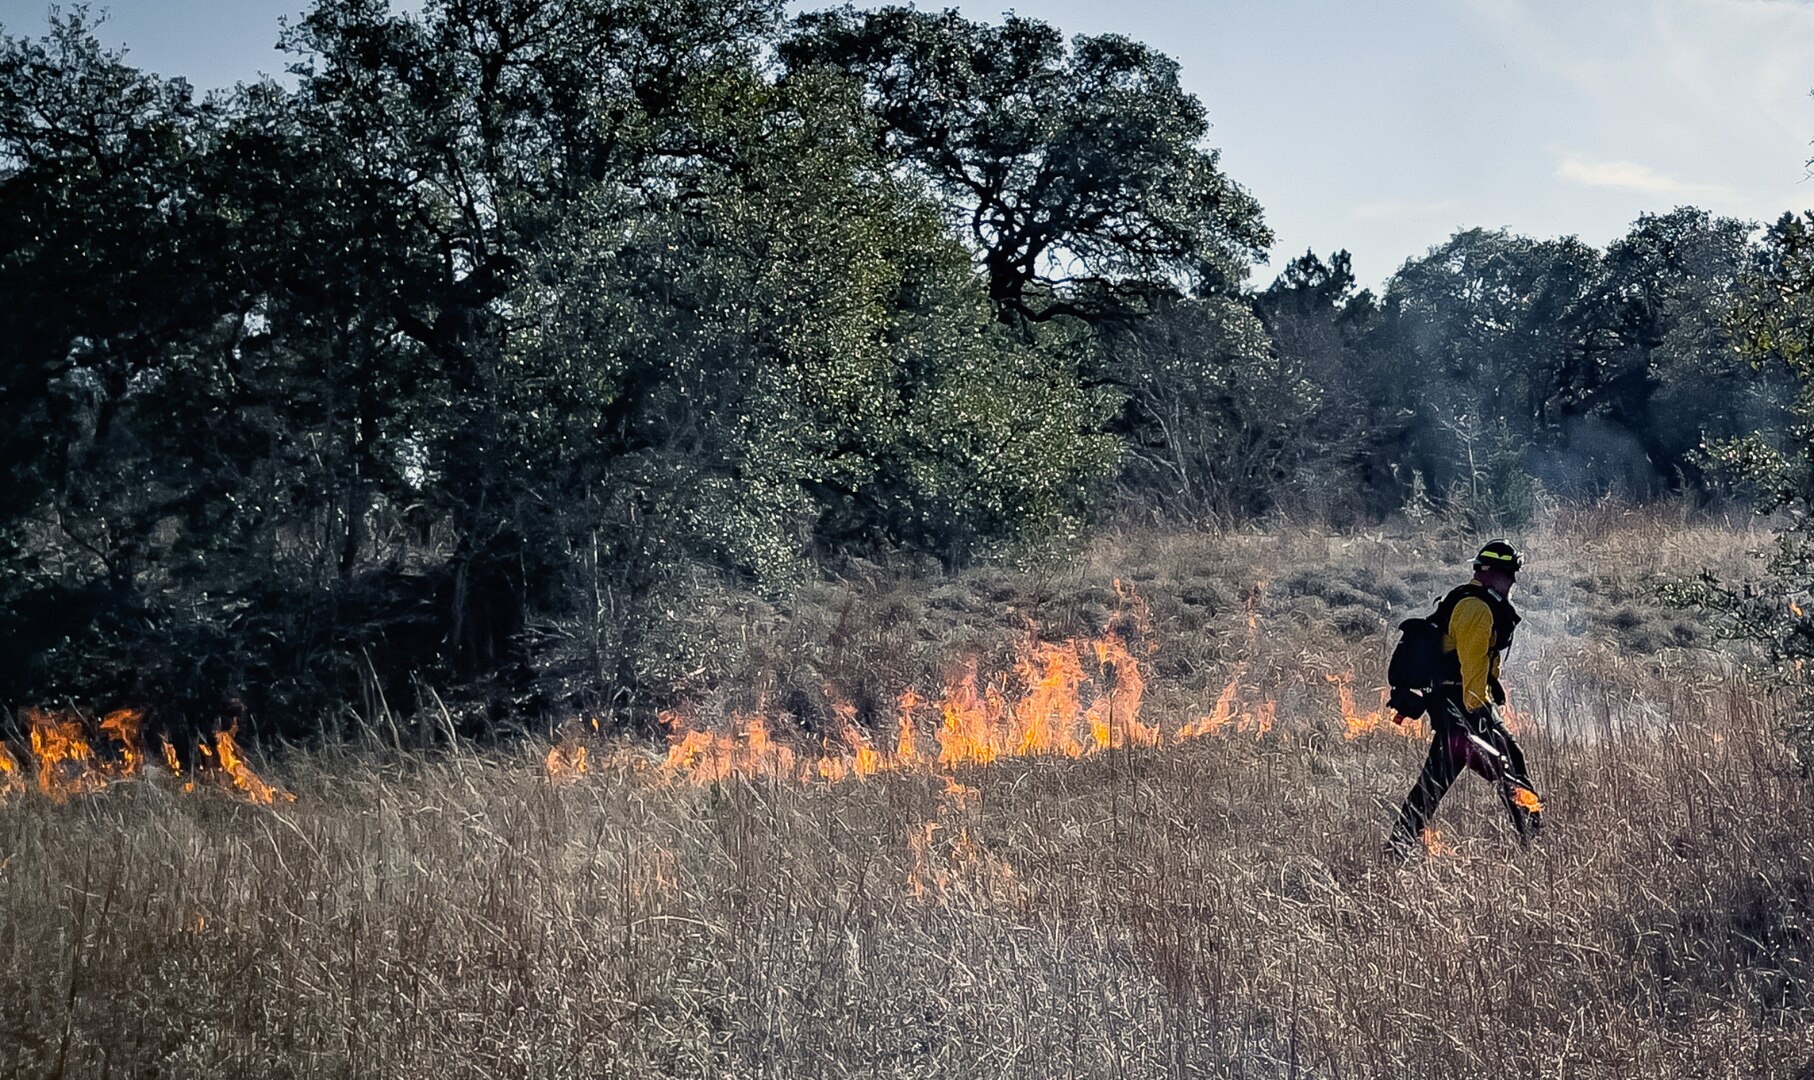 Joint Base San Antonio’s Natural Resources Office, Fire & Emergency Services, and Air Force Wildland Fire Branch officials conducted a prescribed burn Jan. 19